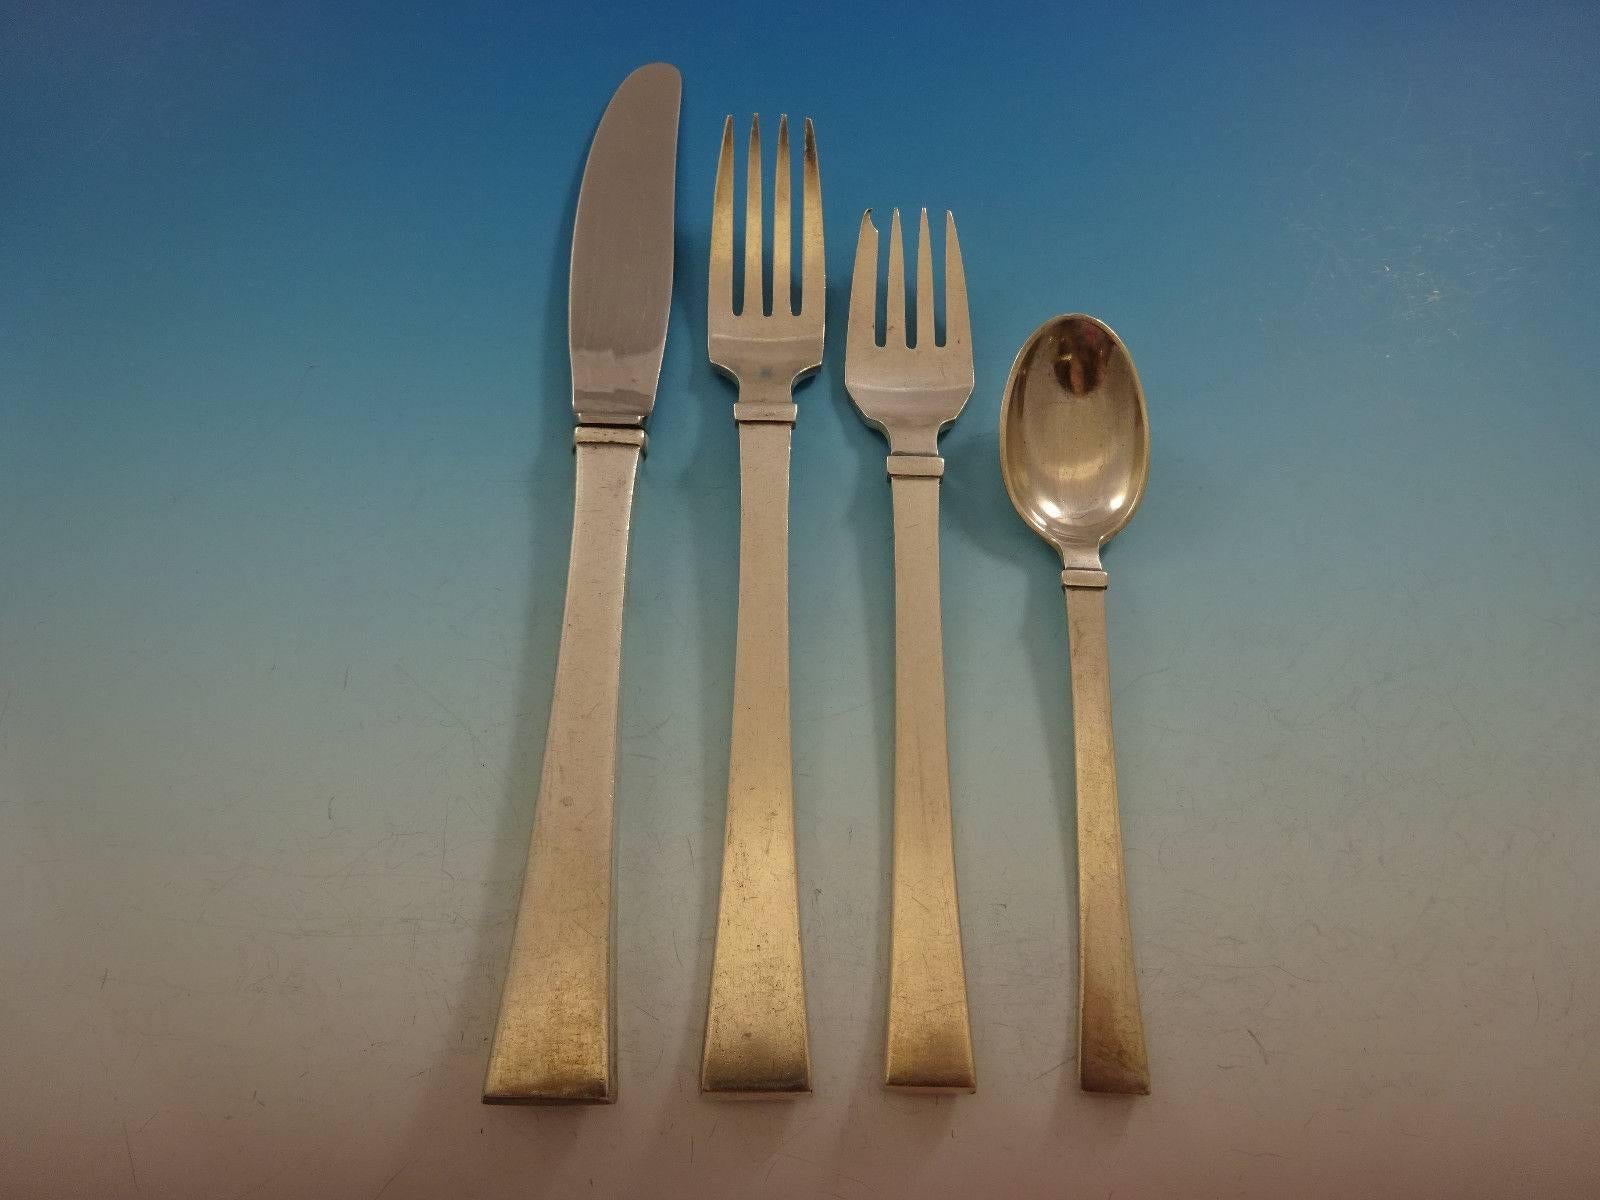 BELL BY HANS HANSEN DANISH MID-CENTURY MODERN sterling silver Flatware set - 60 Pieces. This set includes: 
8 KNIVES, 8 5/8